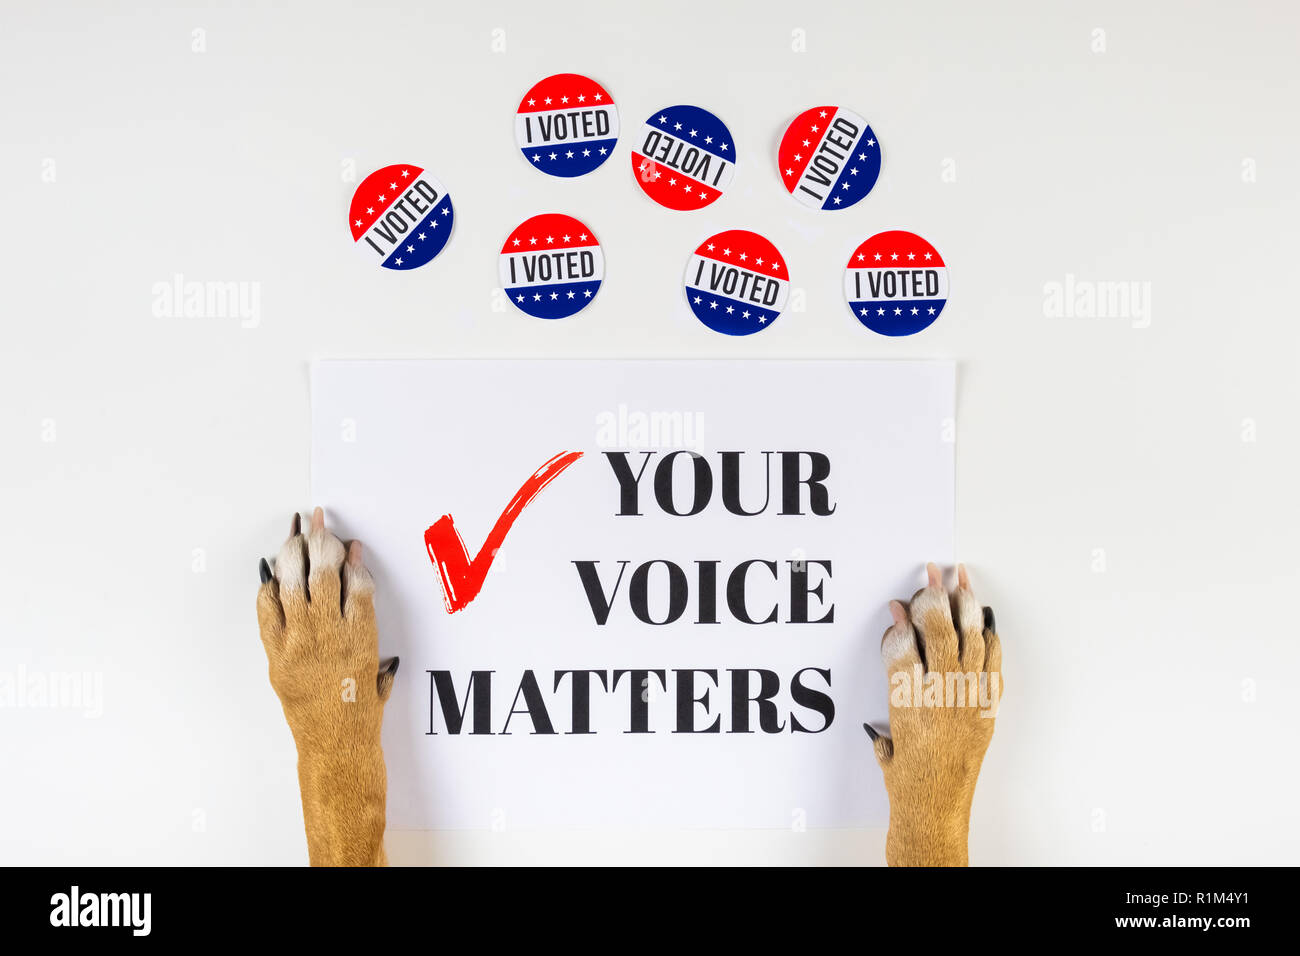 American election activism concept with dog paws. Top view of political sign and vote day badges on white background Stock Photo